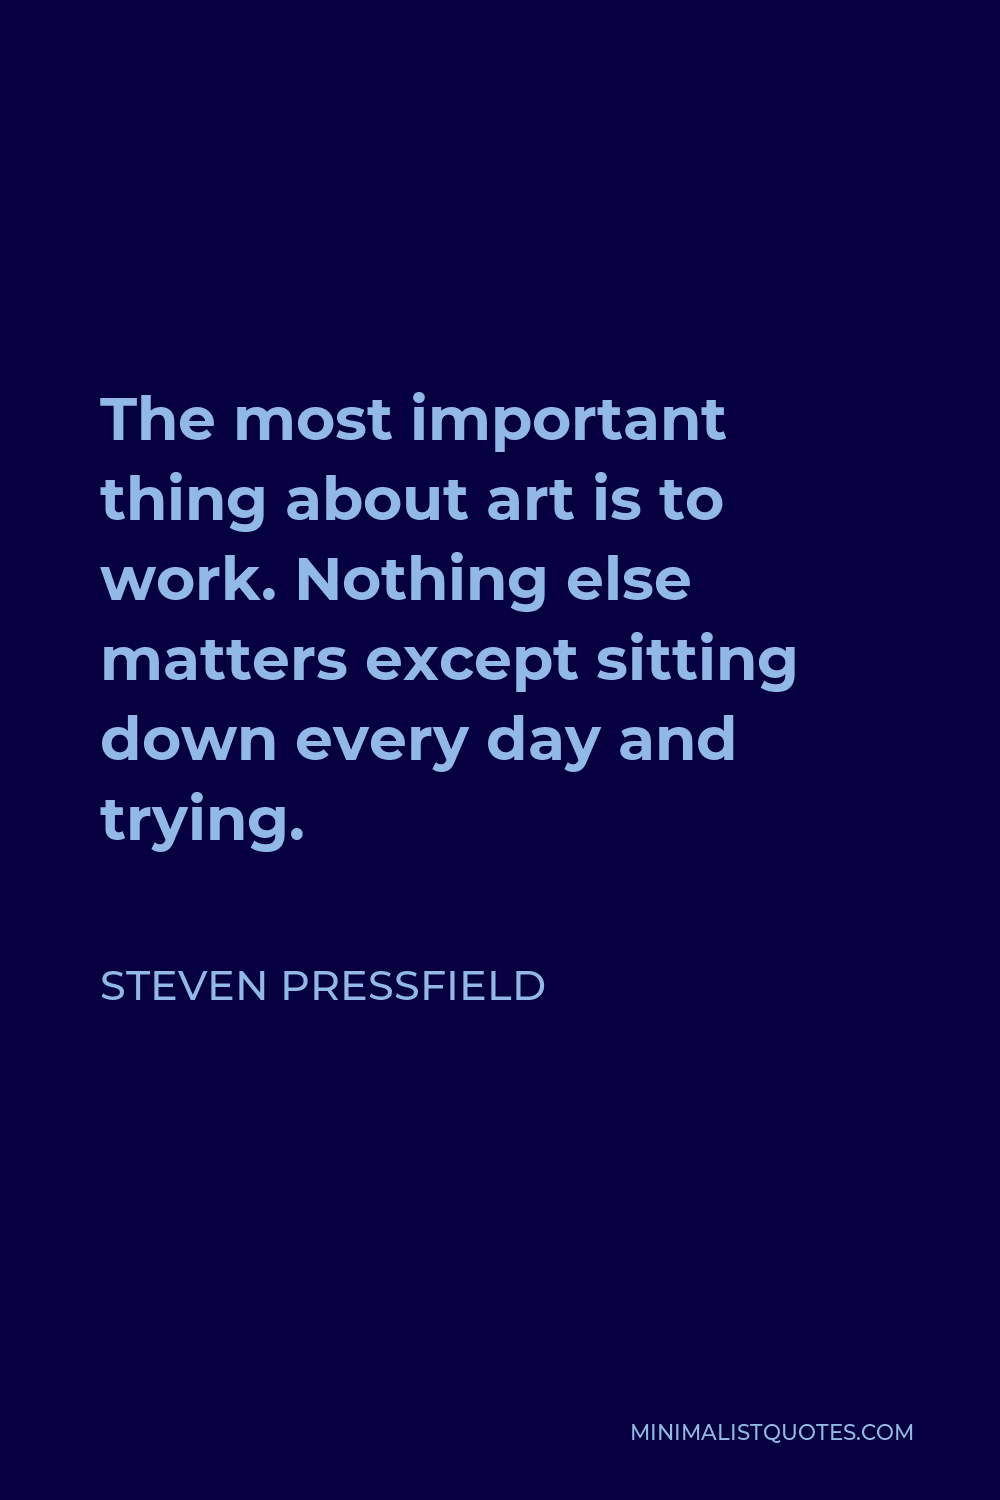 Steven Pressfield Quote - The most important thing about art is to work. Nothing else matters except sitting down every day and trying.